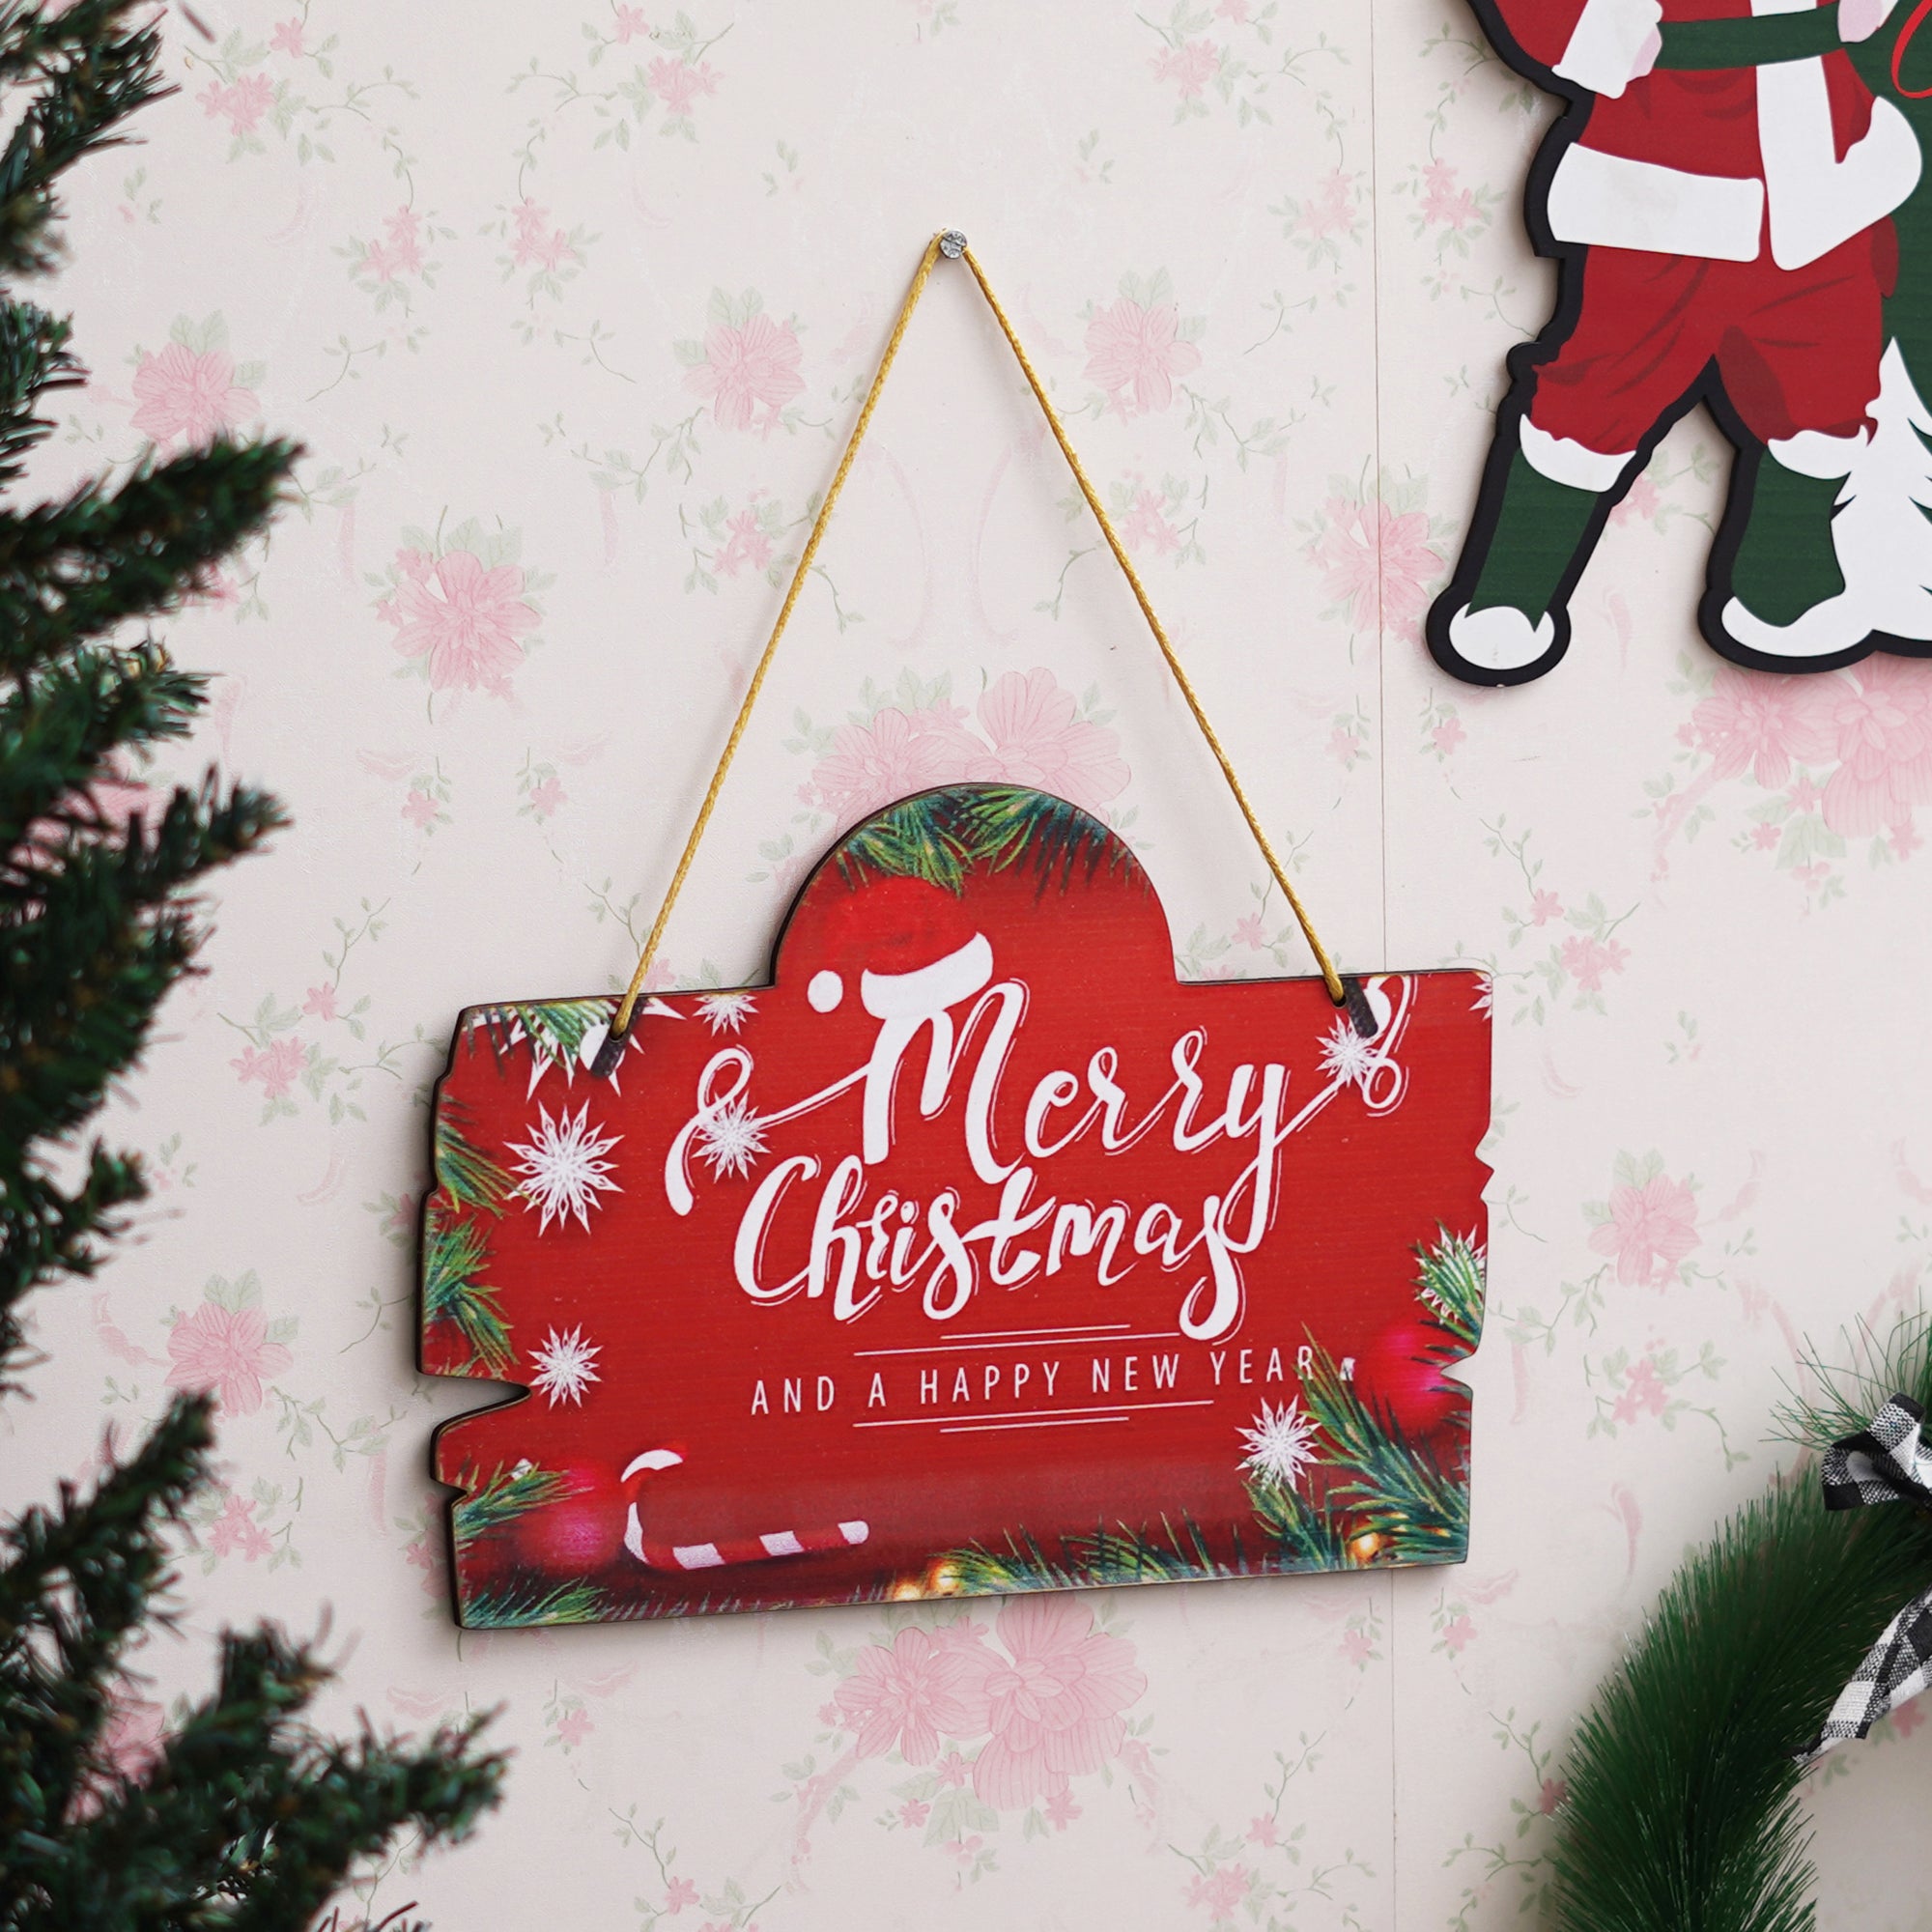 eCraftIndia "Merry Christmas and Happy New Year" Printed Door Wall Hanging for Home and Christmas Tree Decorations (Red, Green, White) 5